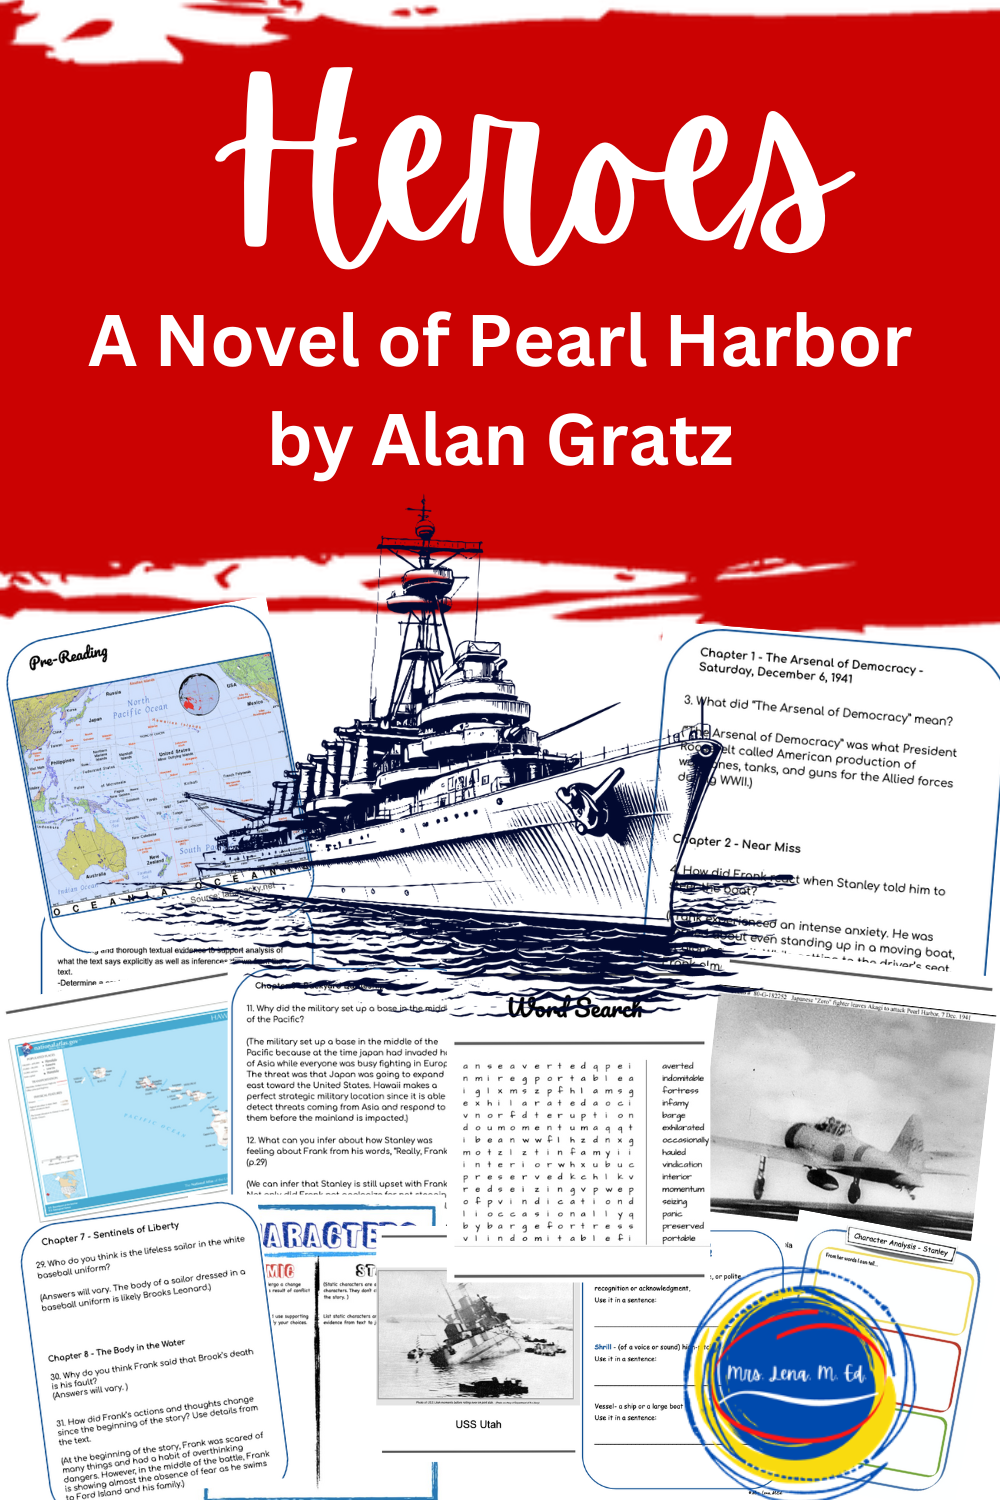 Heroes A Novel of Pearl Harbor by Alan Gratz American History WWII Novel Guide

